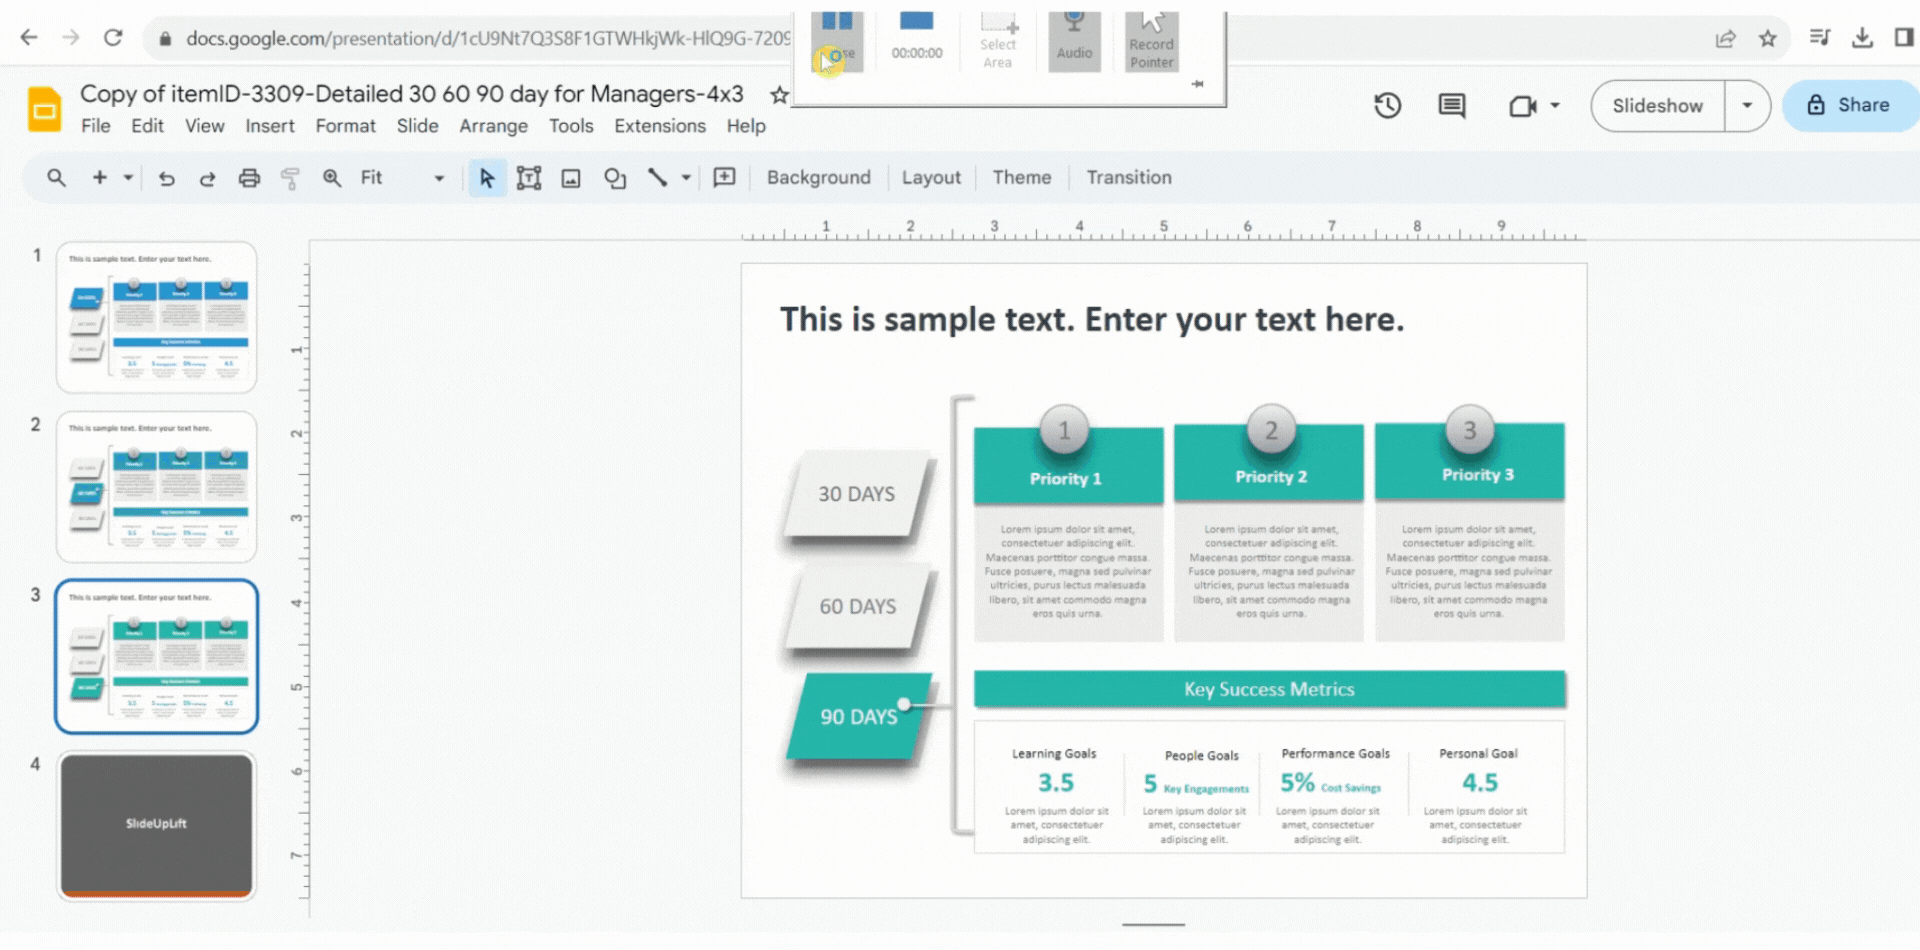 Check Word Count on Google Slides by Converting Your Presentation Into a TXT File